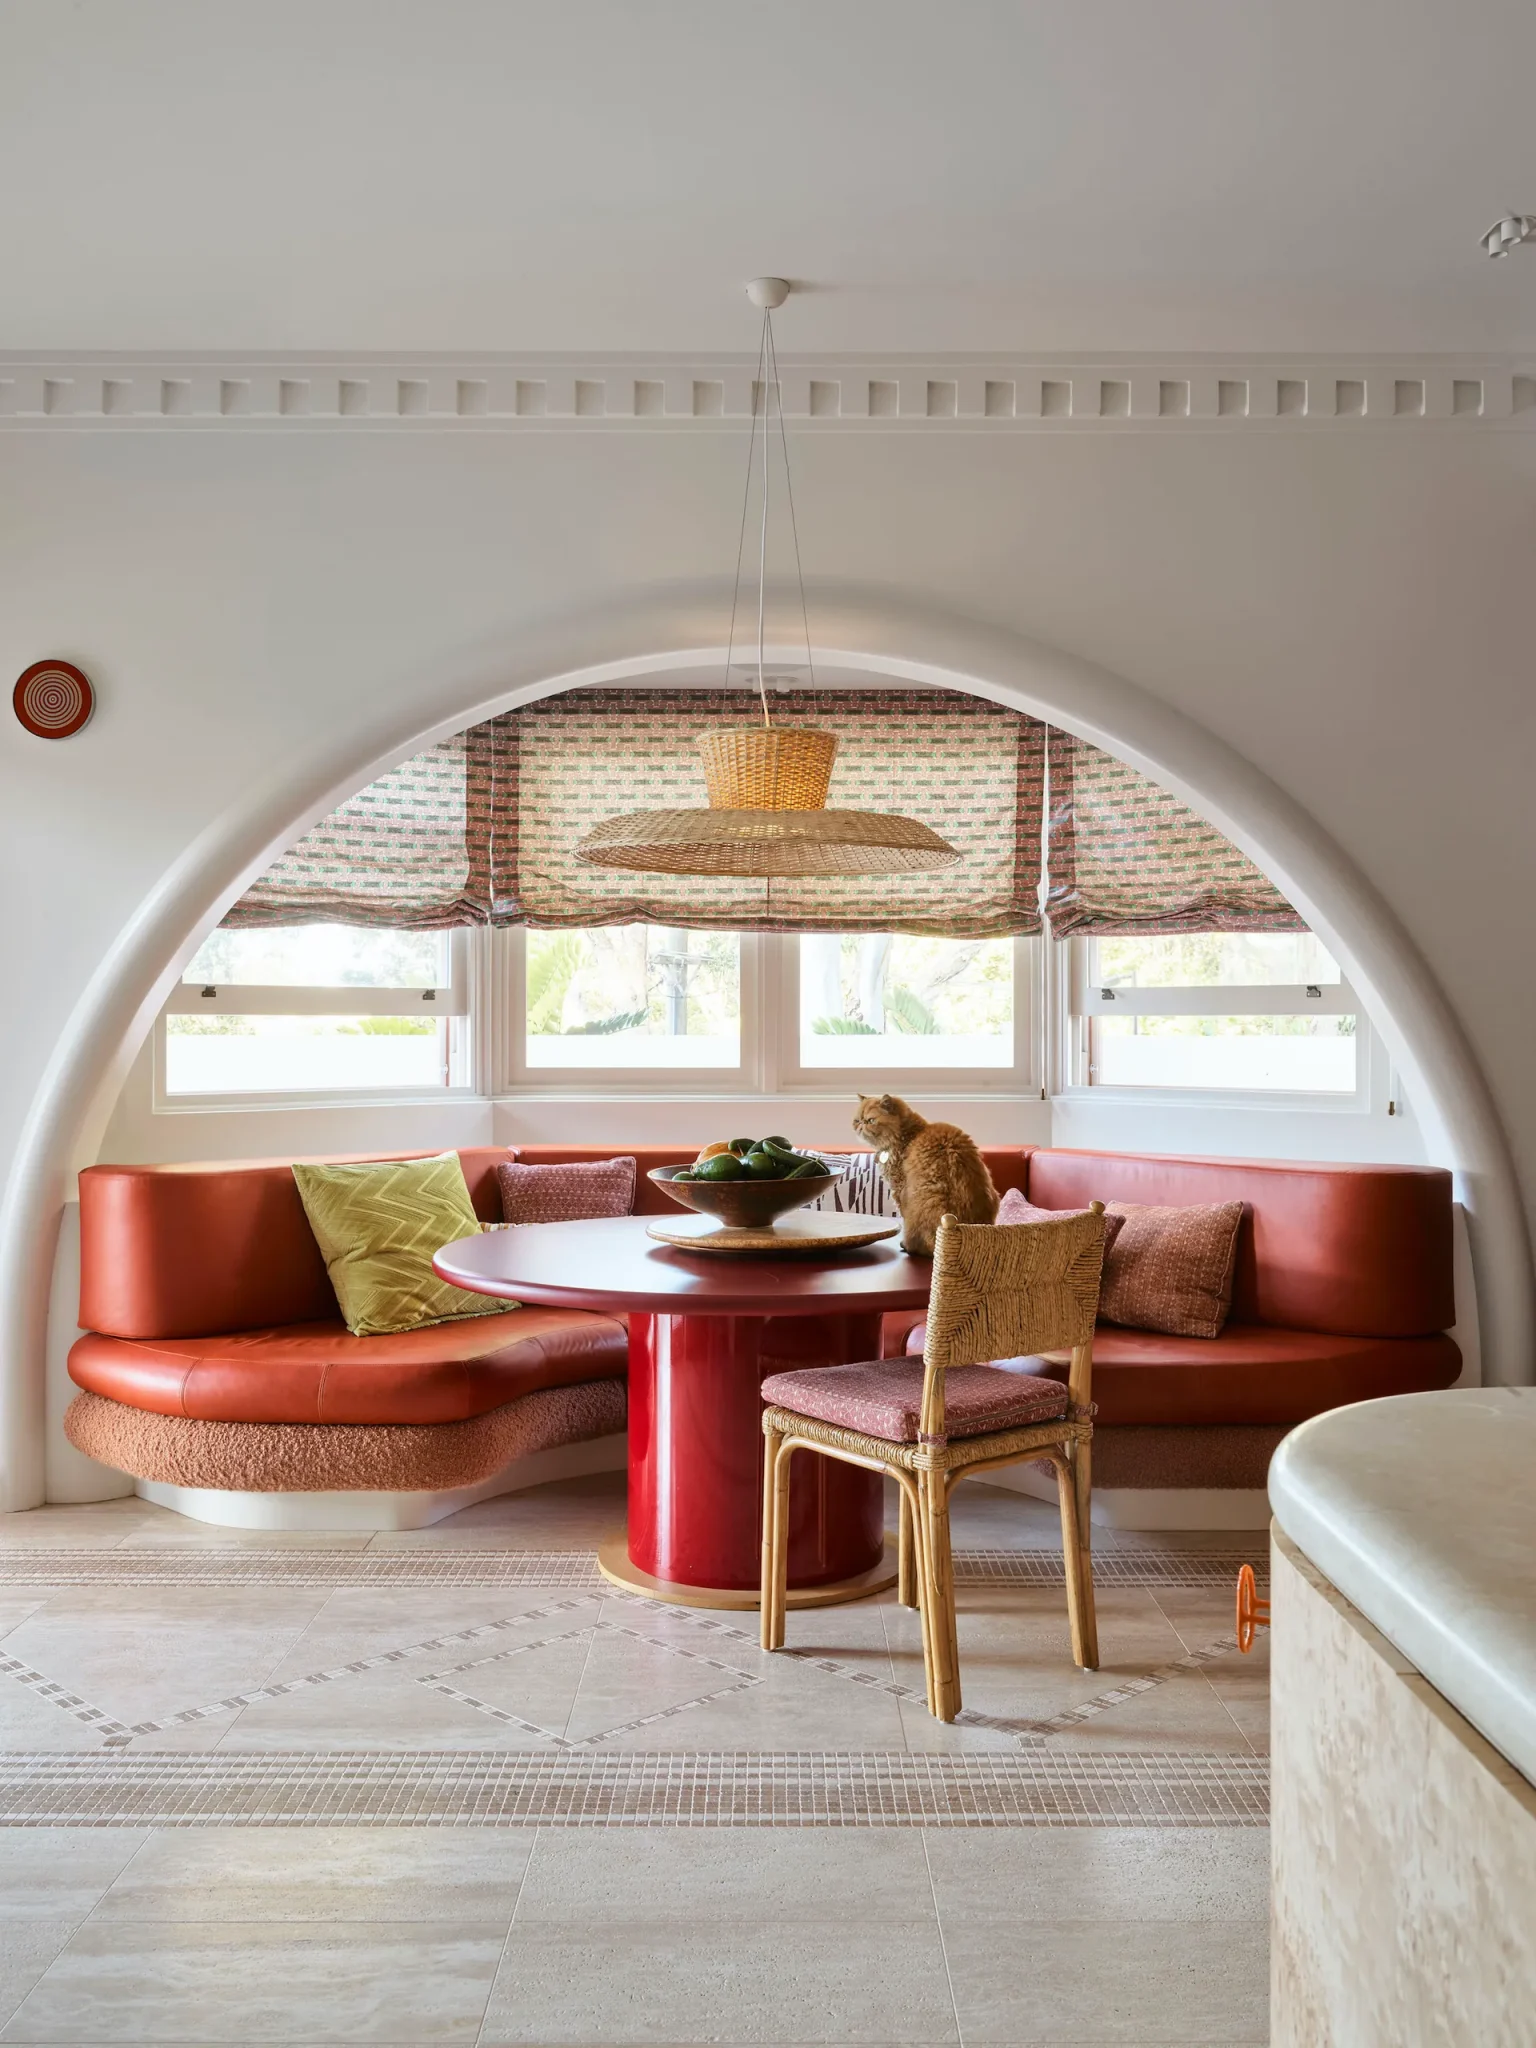 Small dining area on the kitchen featuring a curved red sofa and a round dining table by its center